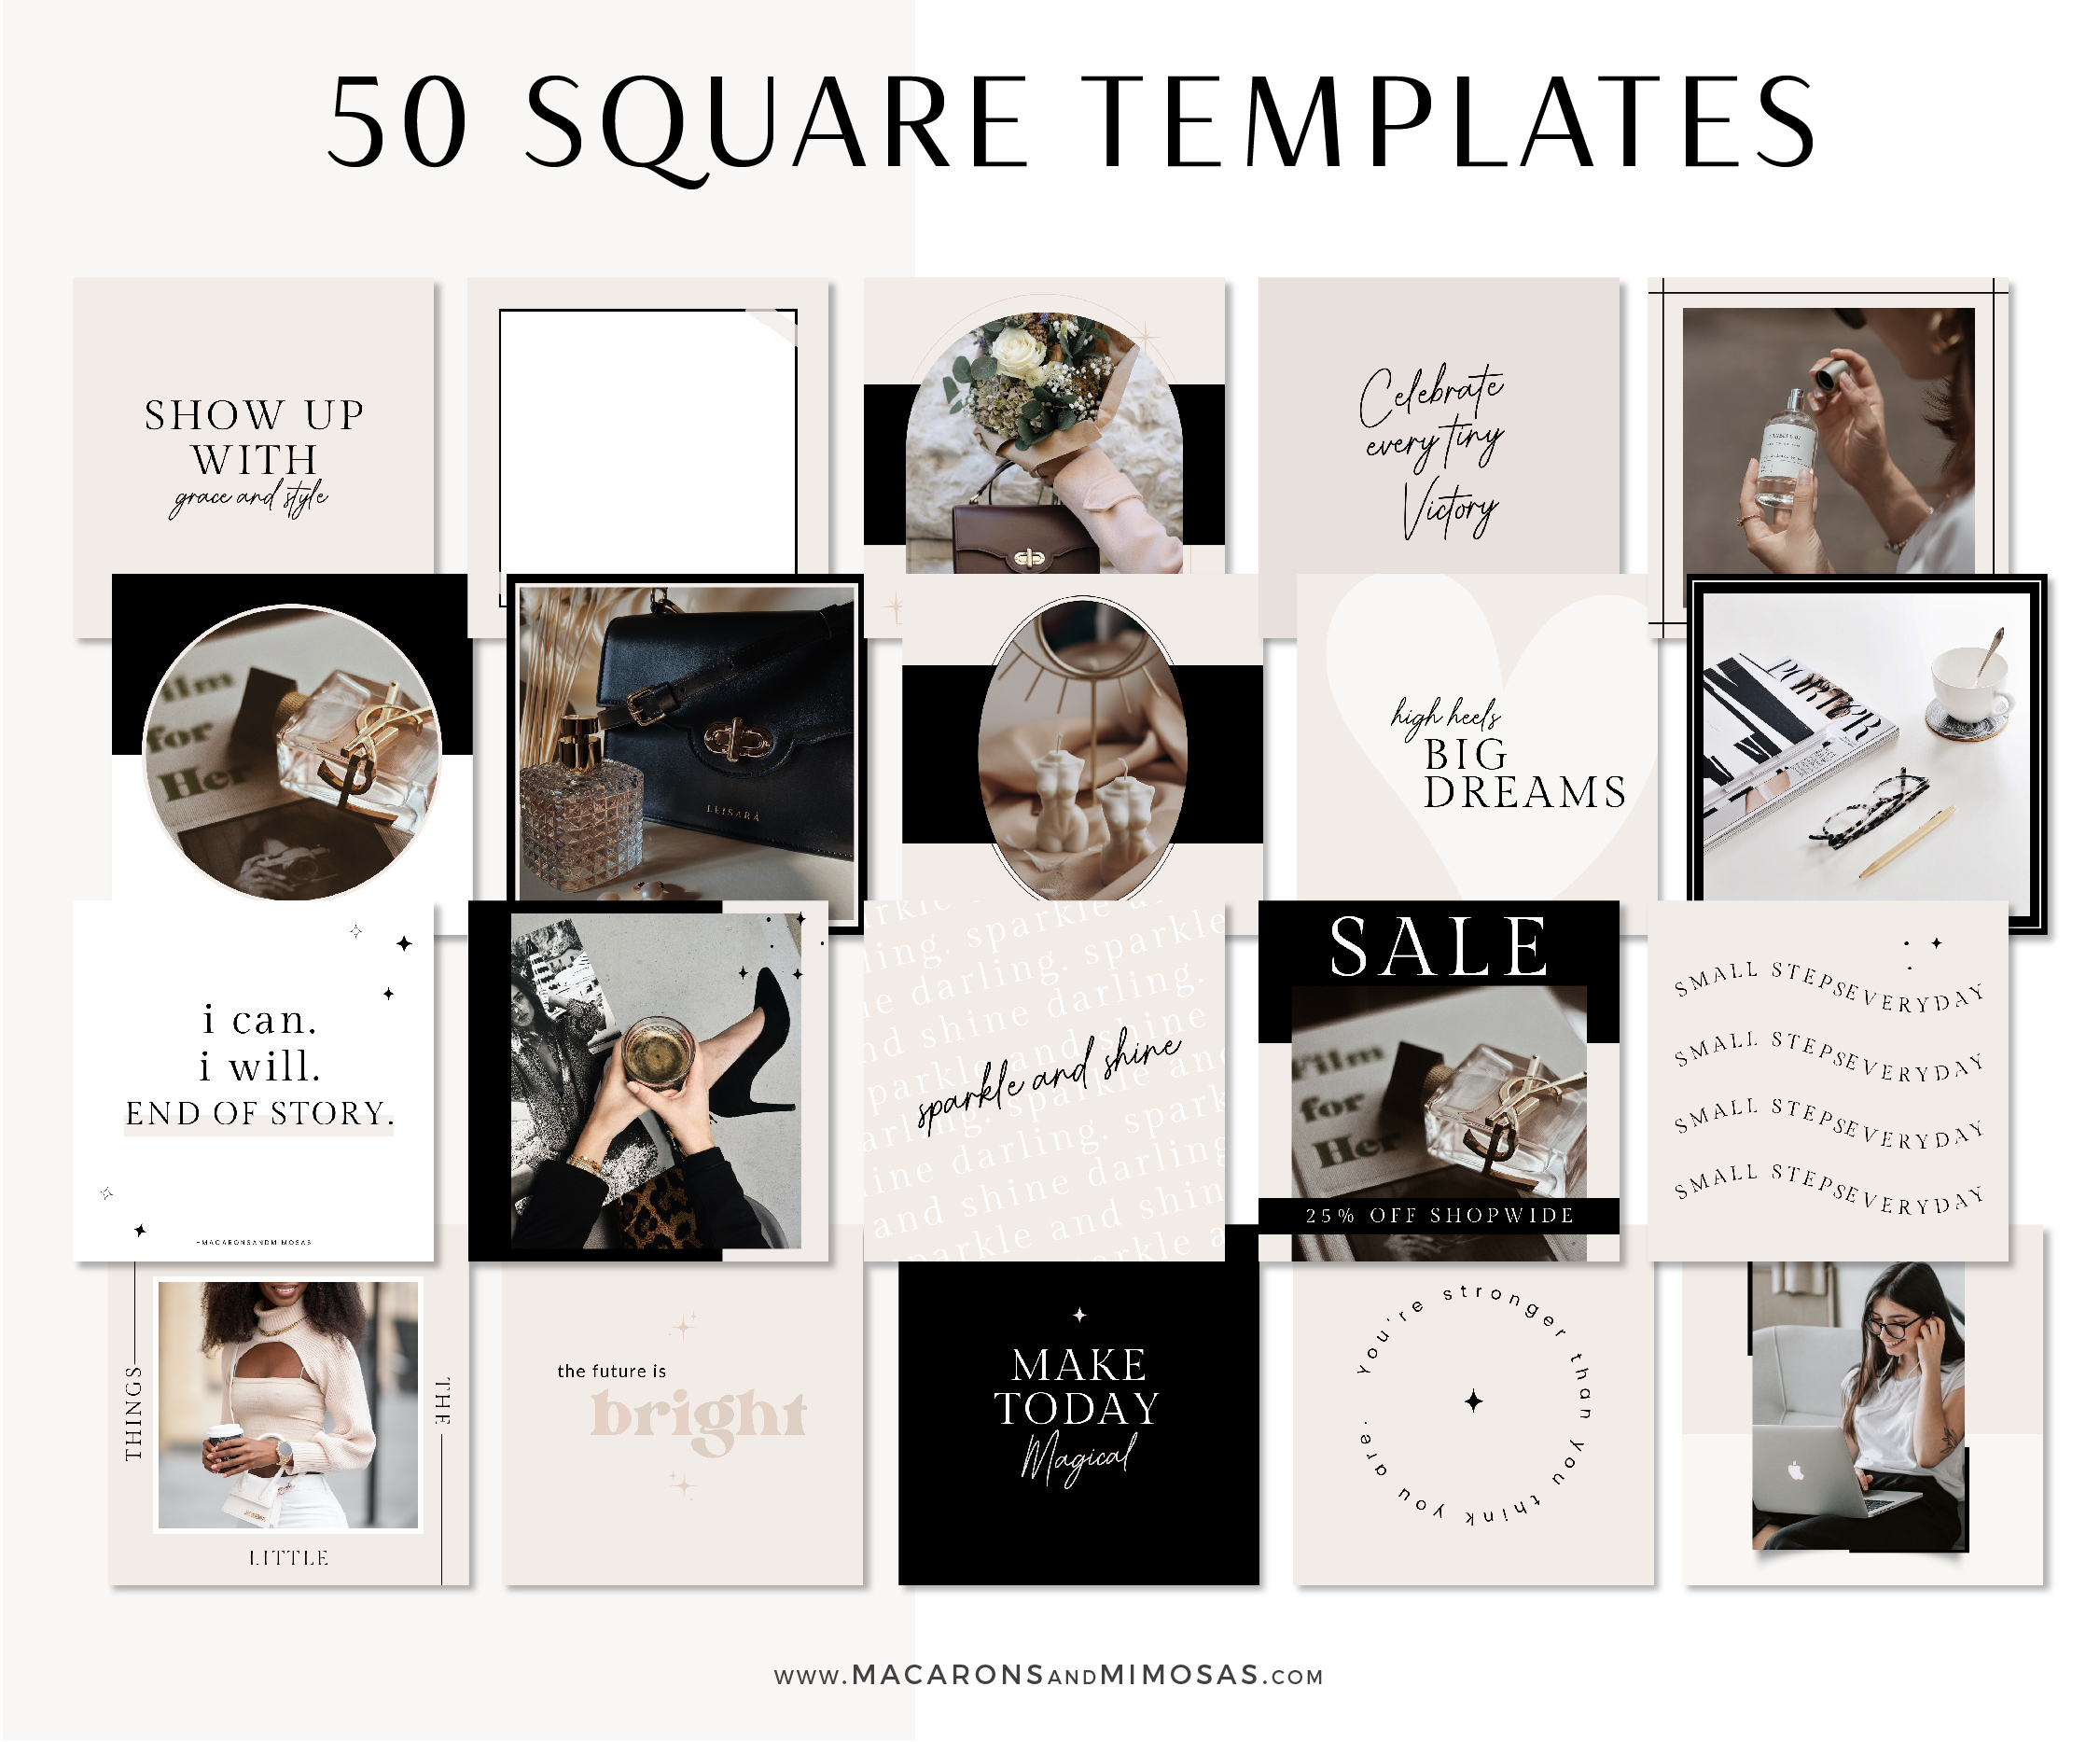 Modern Luxe Instagram Post Templates for Canva, Black White Instagram Templates for Stories and Posts, Beauty Templates for Instagram Reels